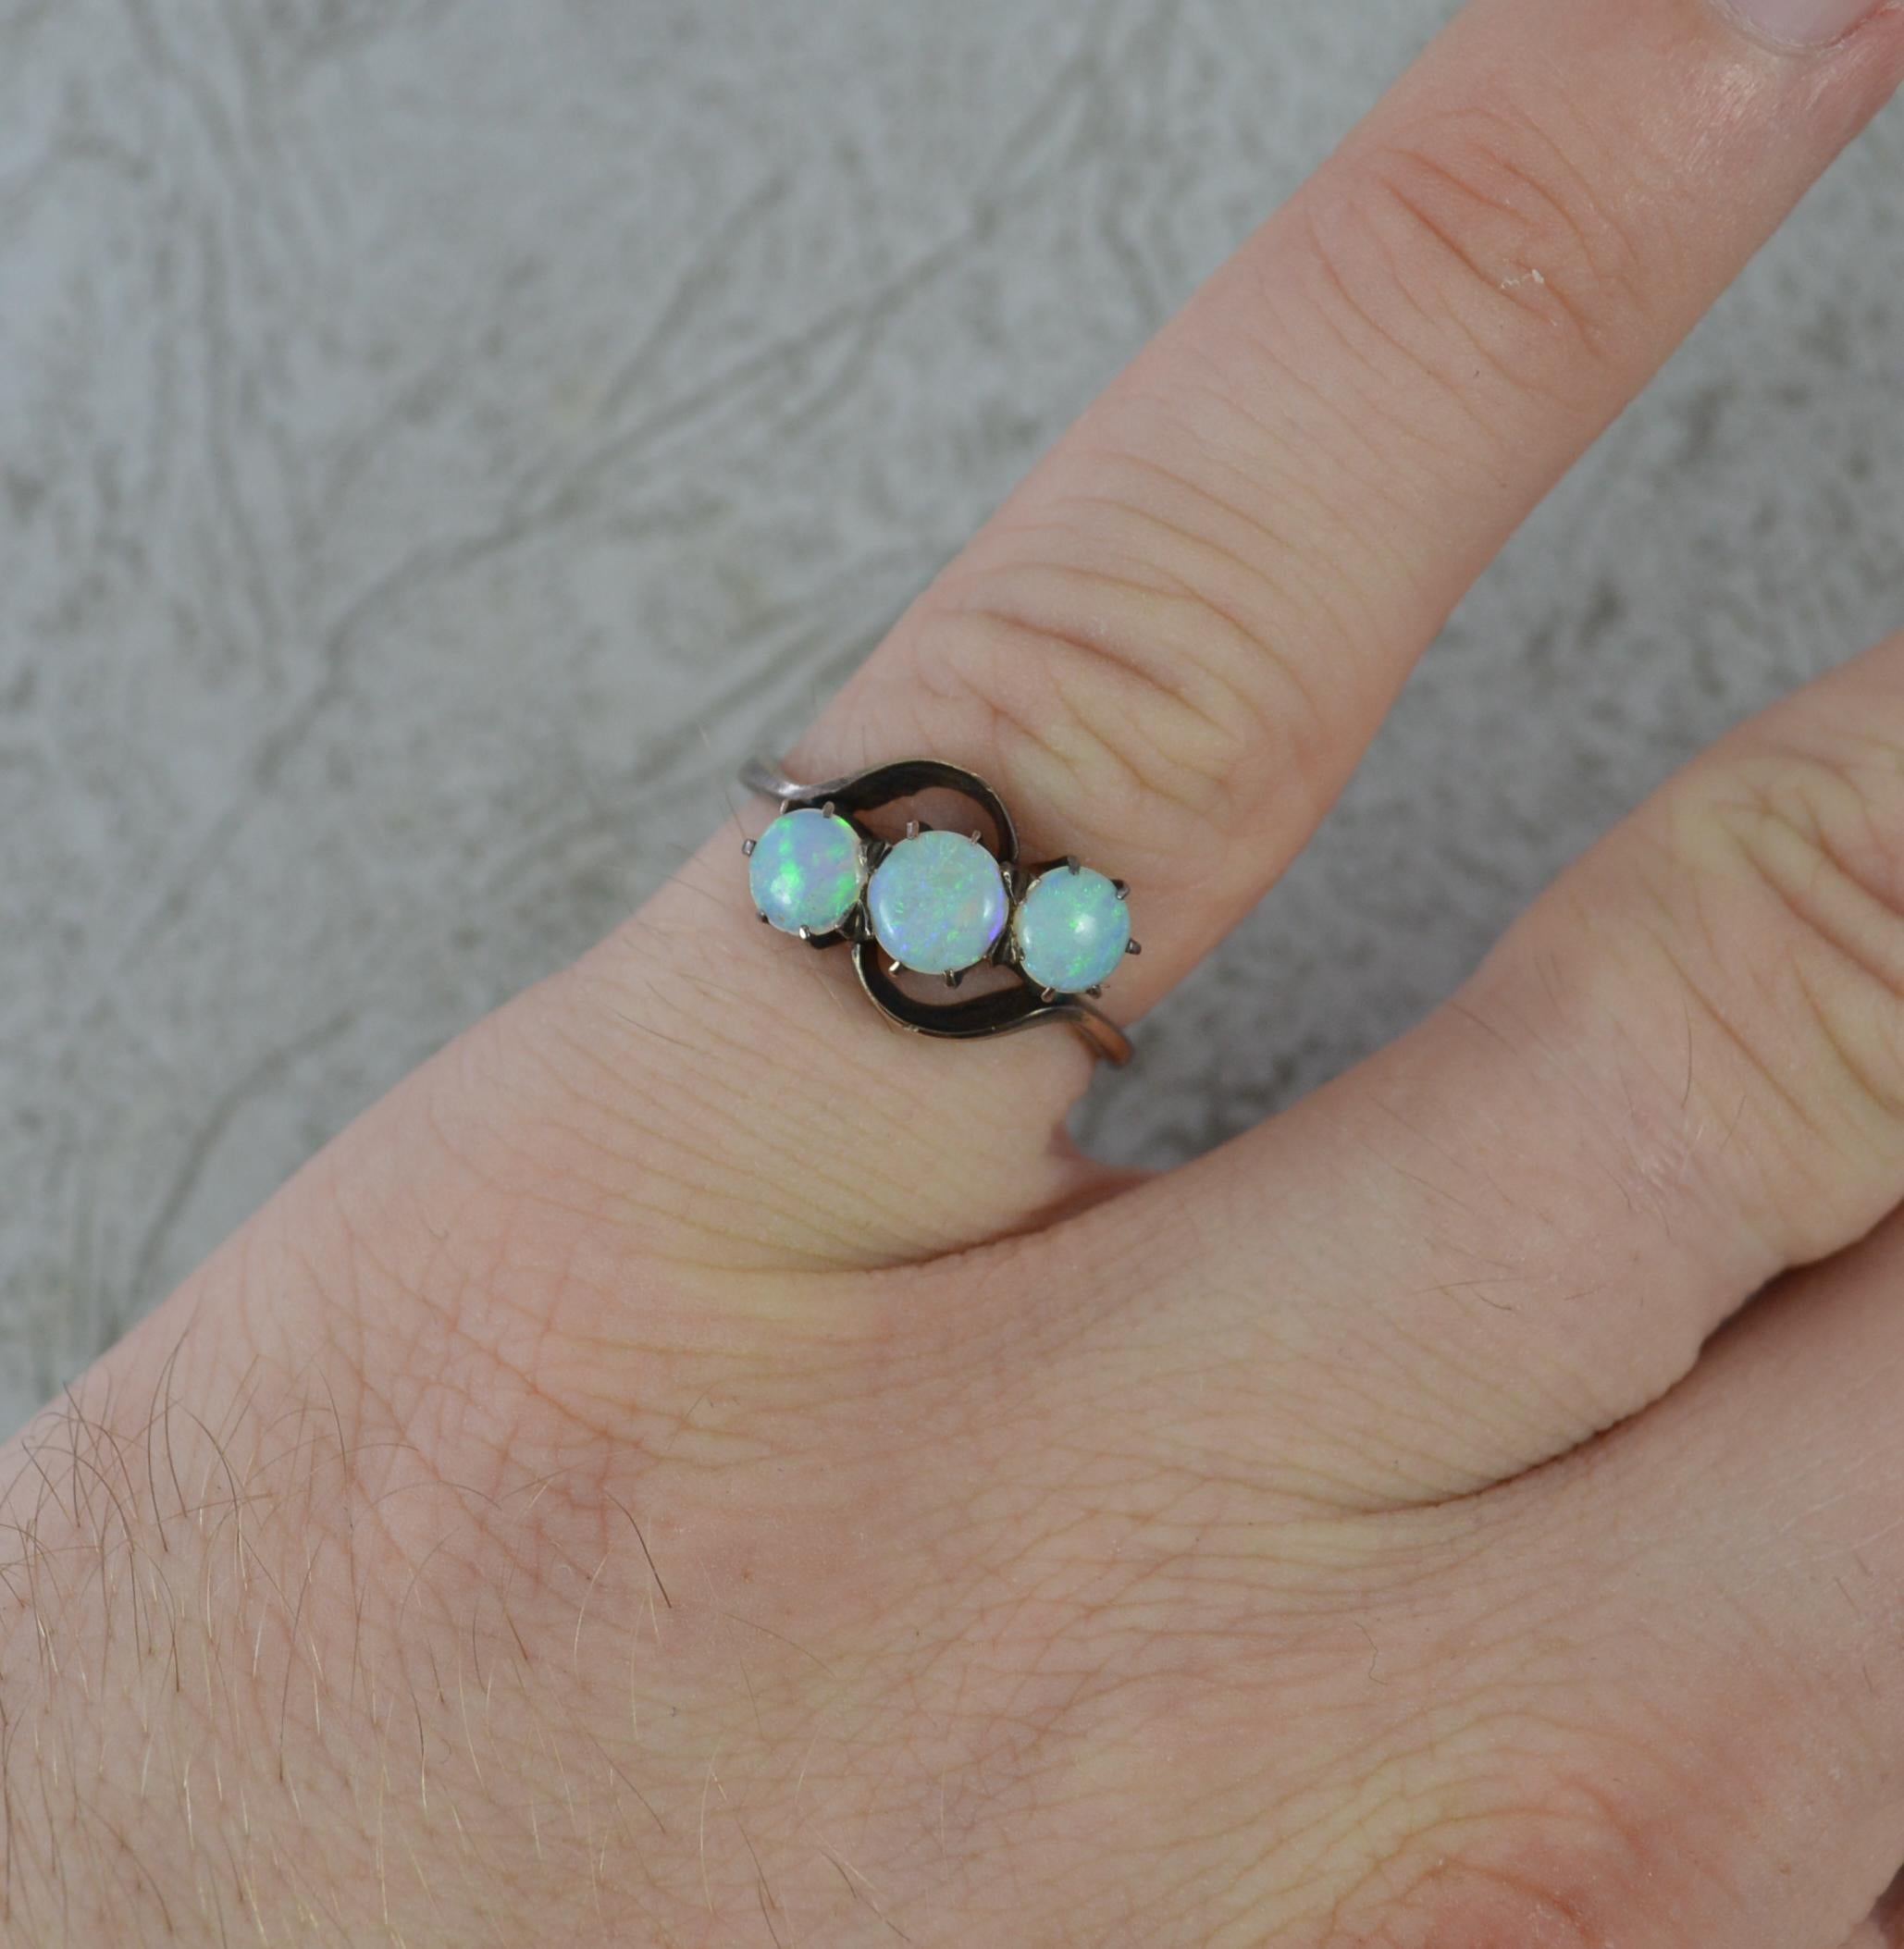 A superb natural opal ring.
Solid 14 carat gold example.
Designed with three round shaped natural opals in claw settings on twist.
13mm spread of stones.
Circa 1940/50.

CONDITION ; Very good. Well set stone. Crisp design. Light wear only. Please